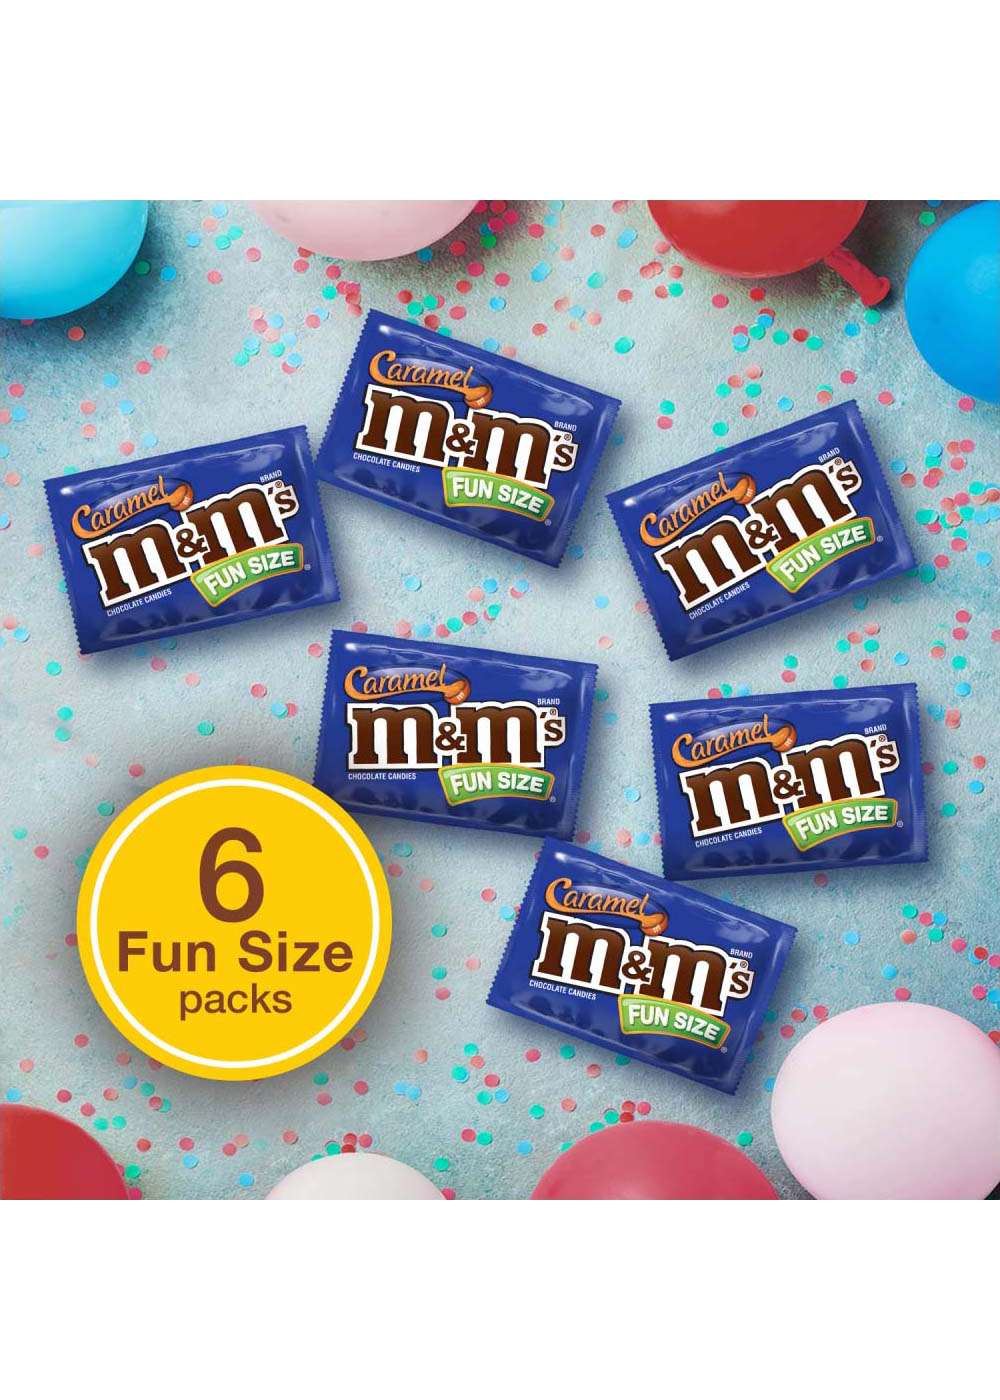 M&M's Caramel Fun Size Chocolate Candy, 3.49 ounce bag, 6 pack, Packaged  Candy